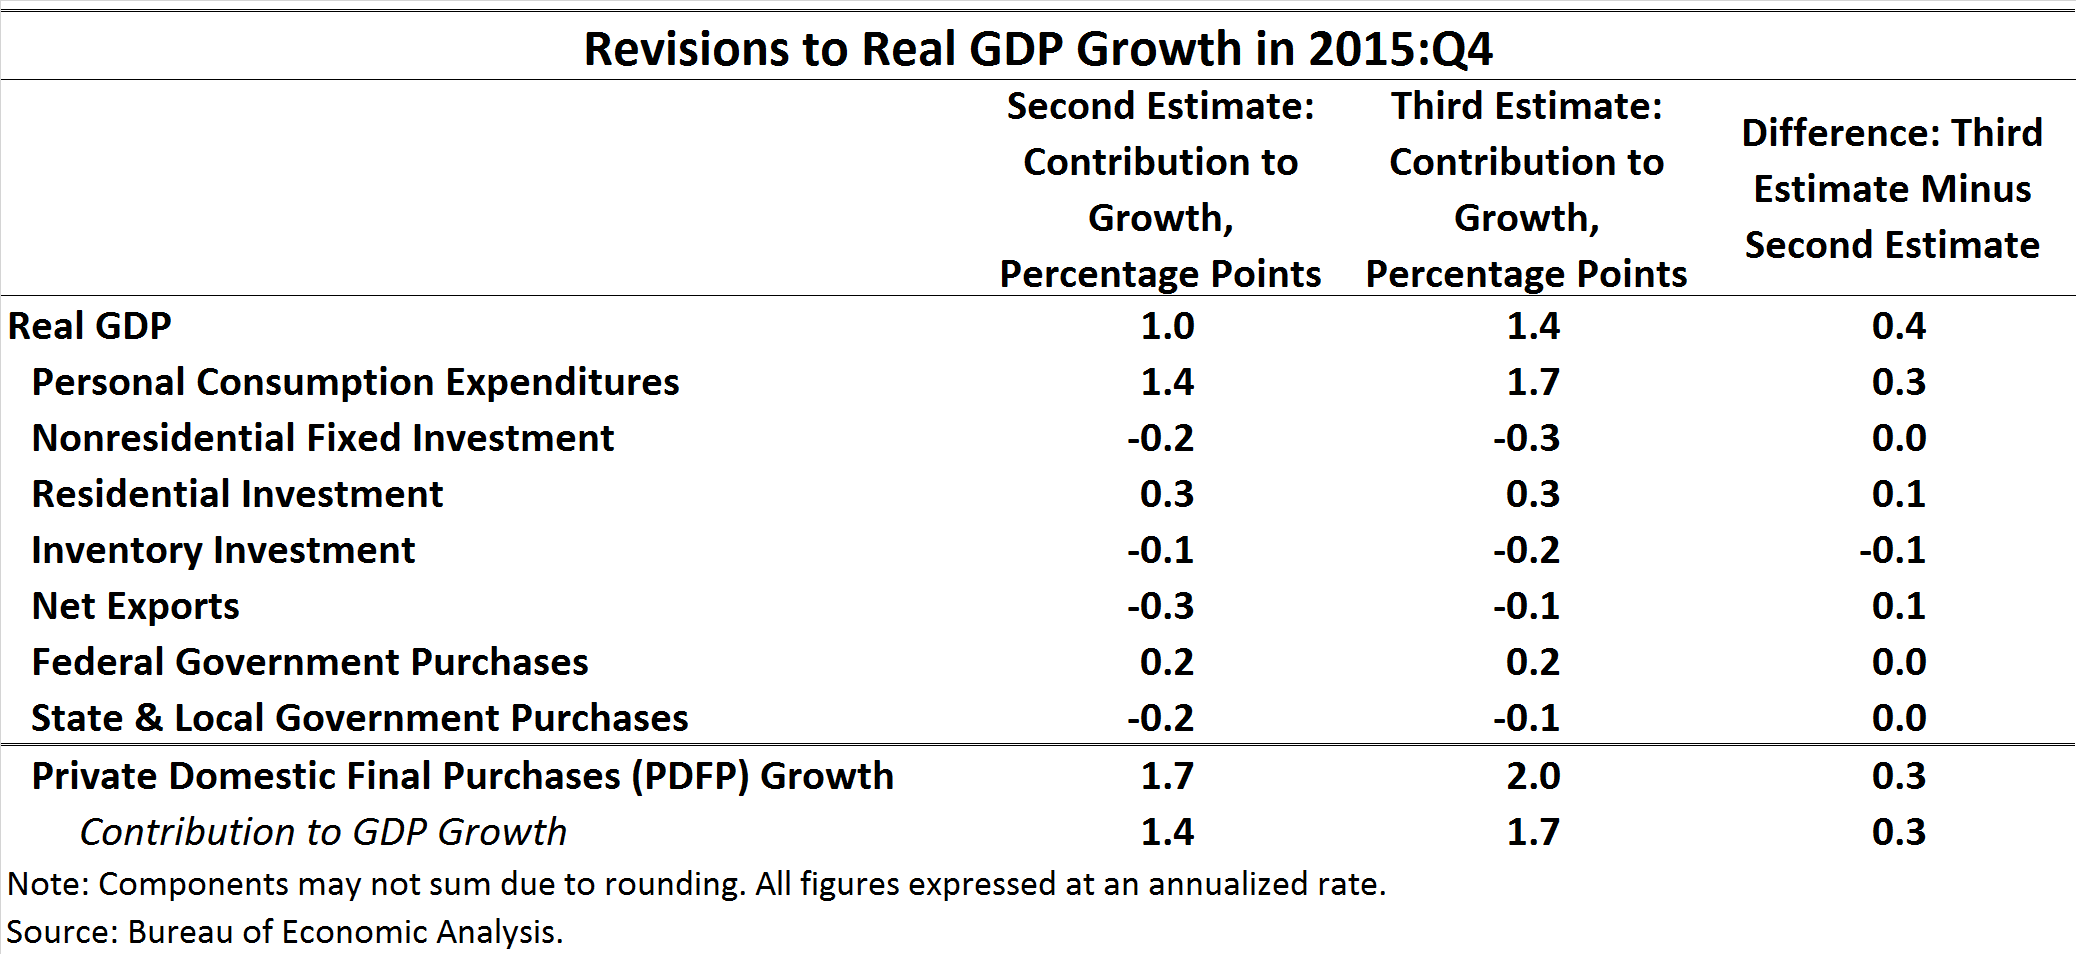 Revisions to Real GDP Growth in 2015:Q4